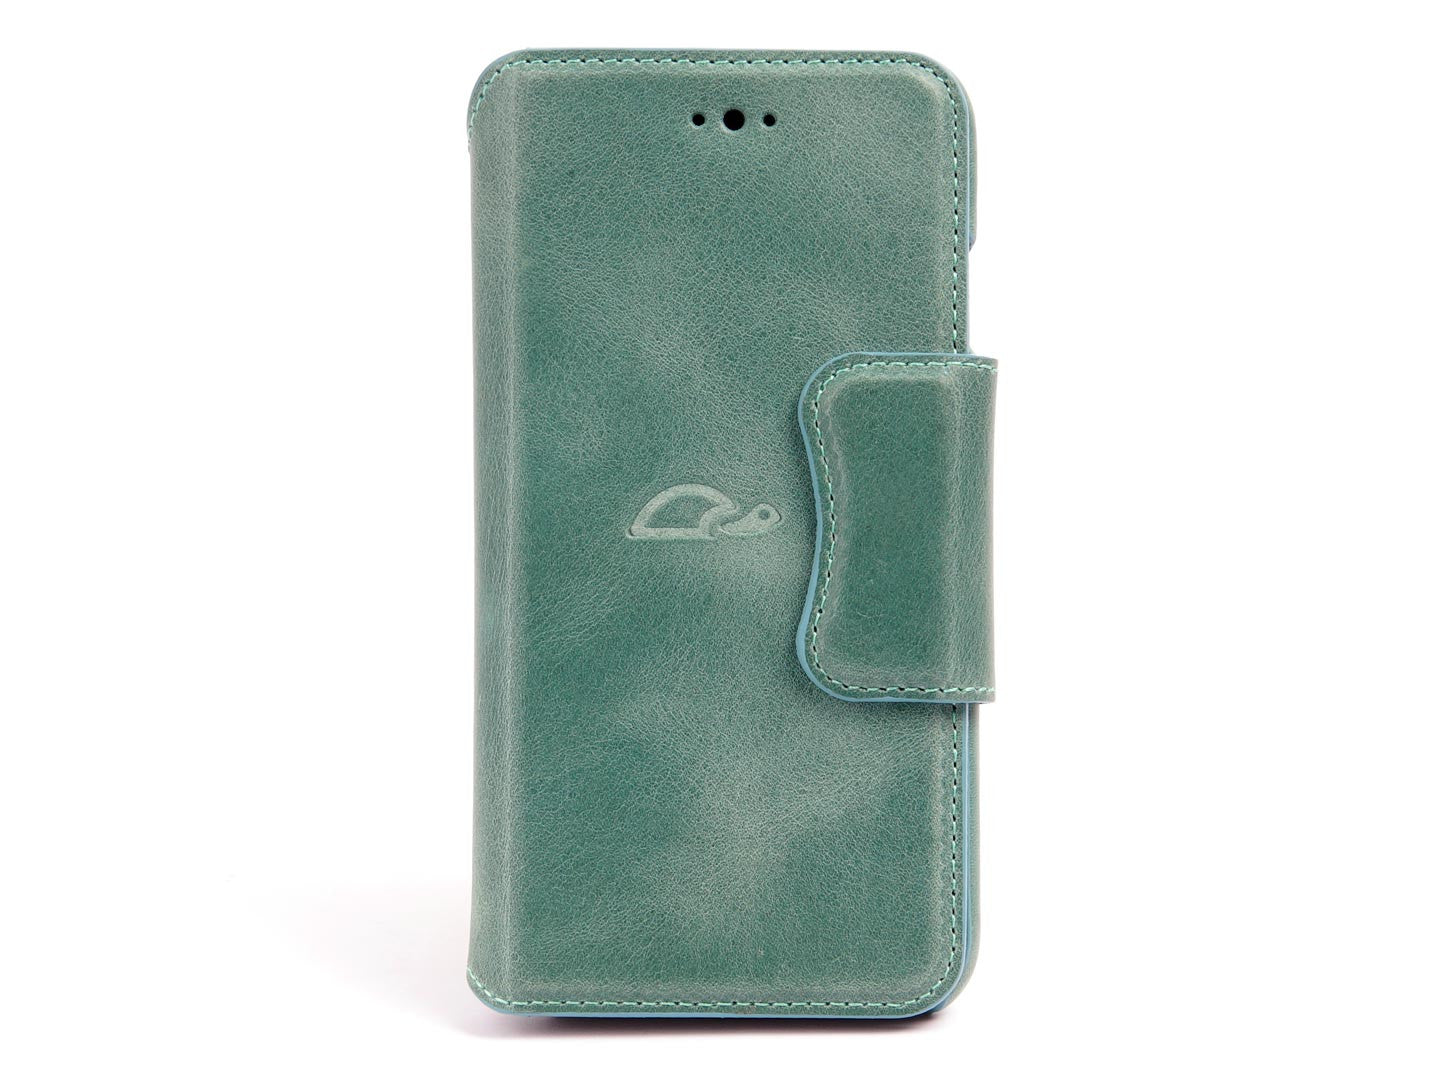 iPhone 7 / 8 leather wallet case - turquoise green - front - Carapaz